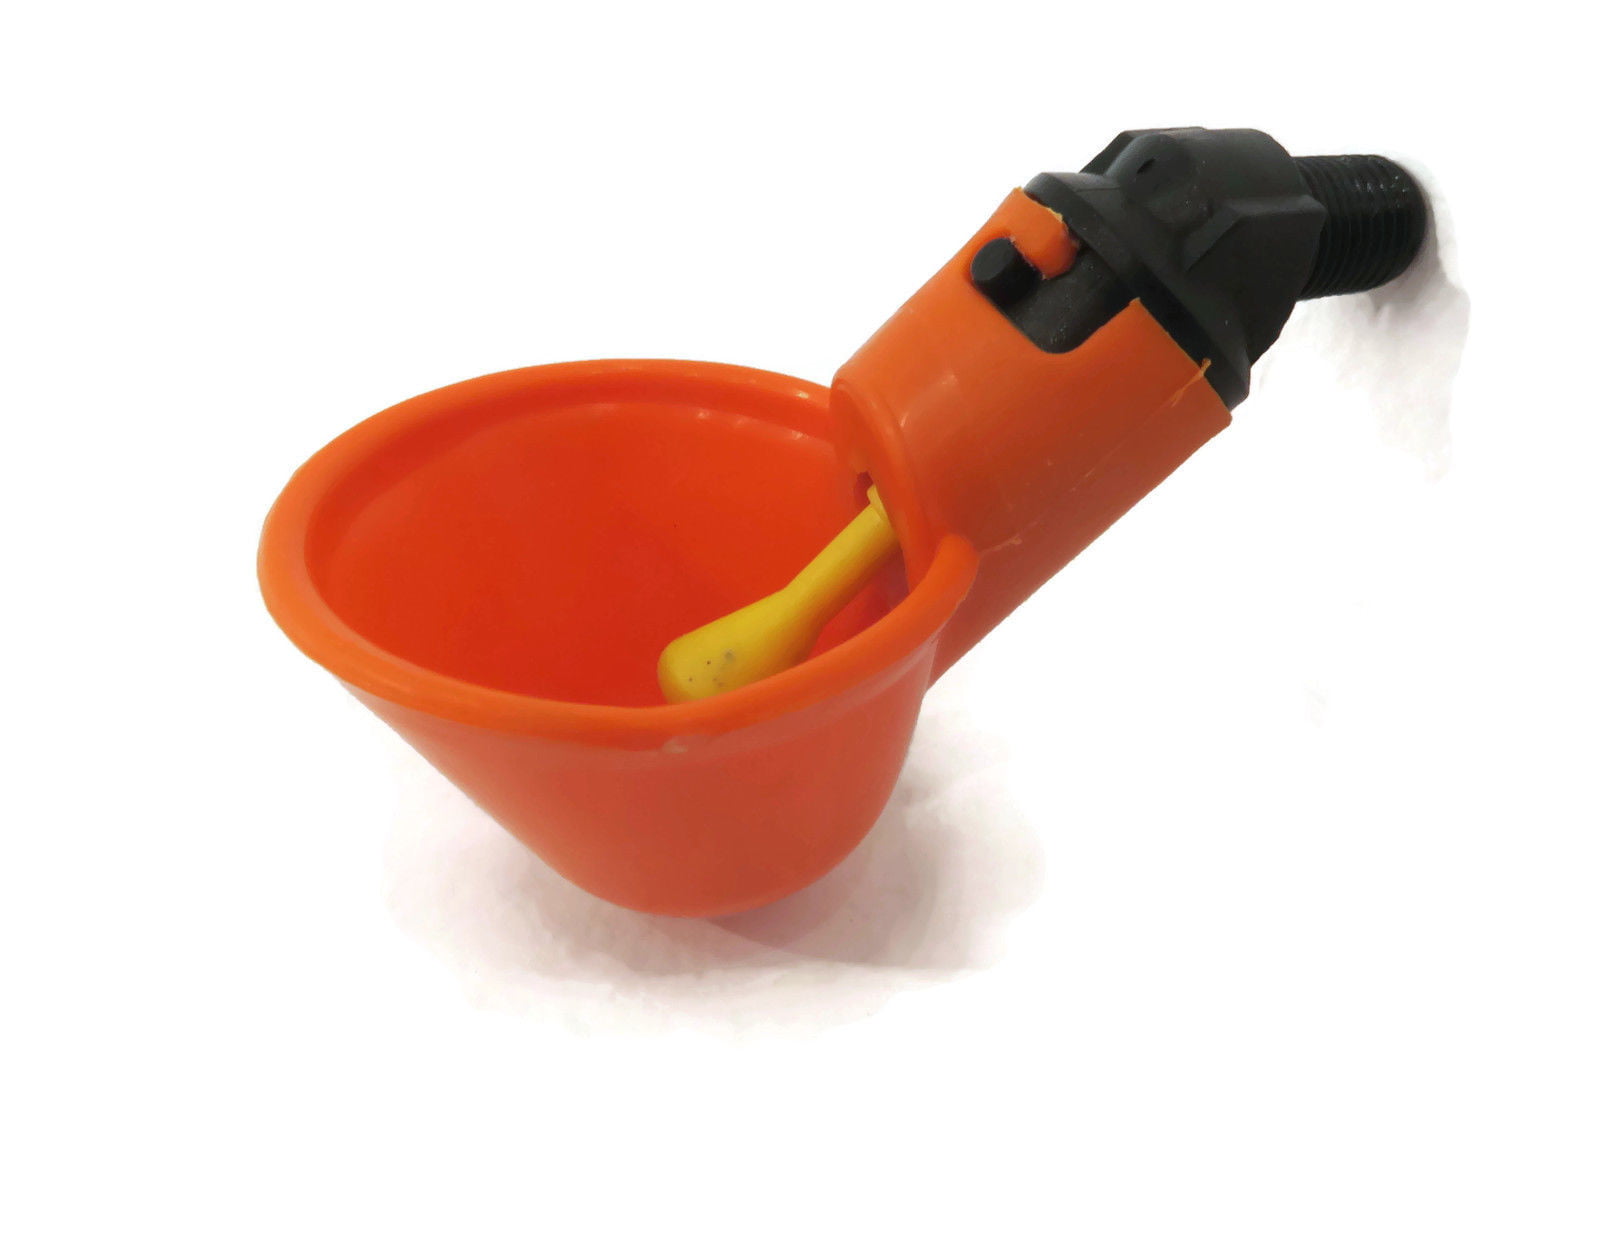 POULTRY DRINKER Waterers for Chickens Hens Chicks Turkey Quail Poultry Birds 6 